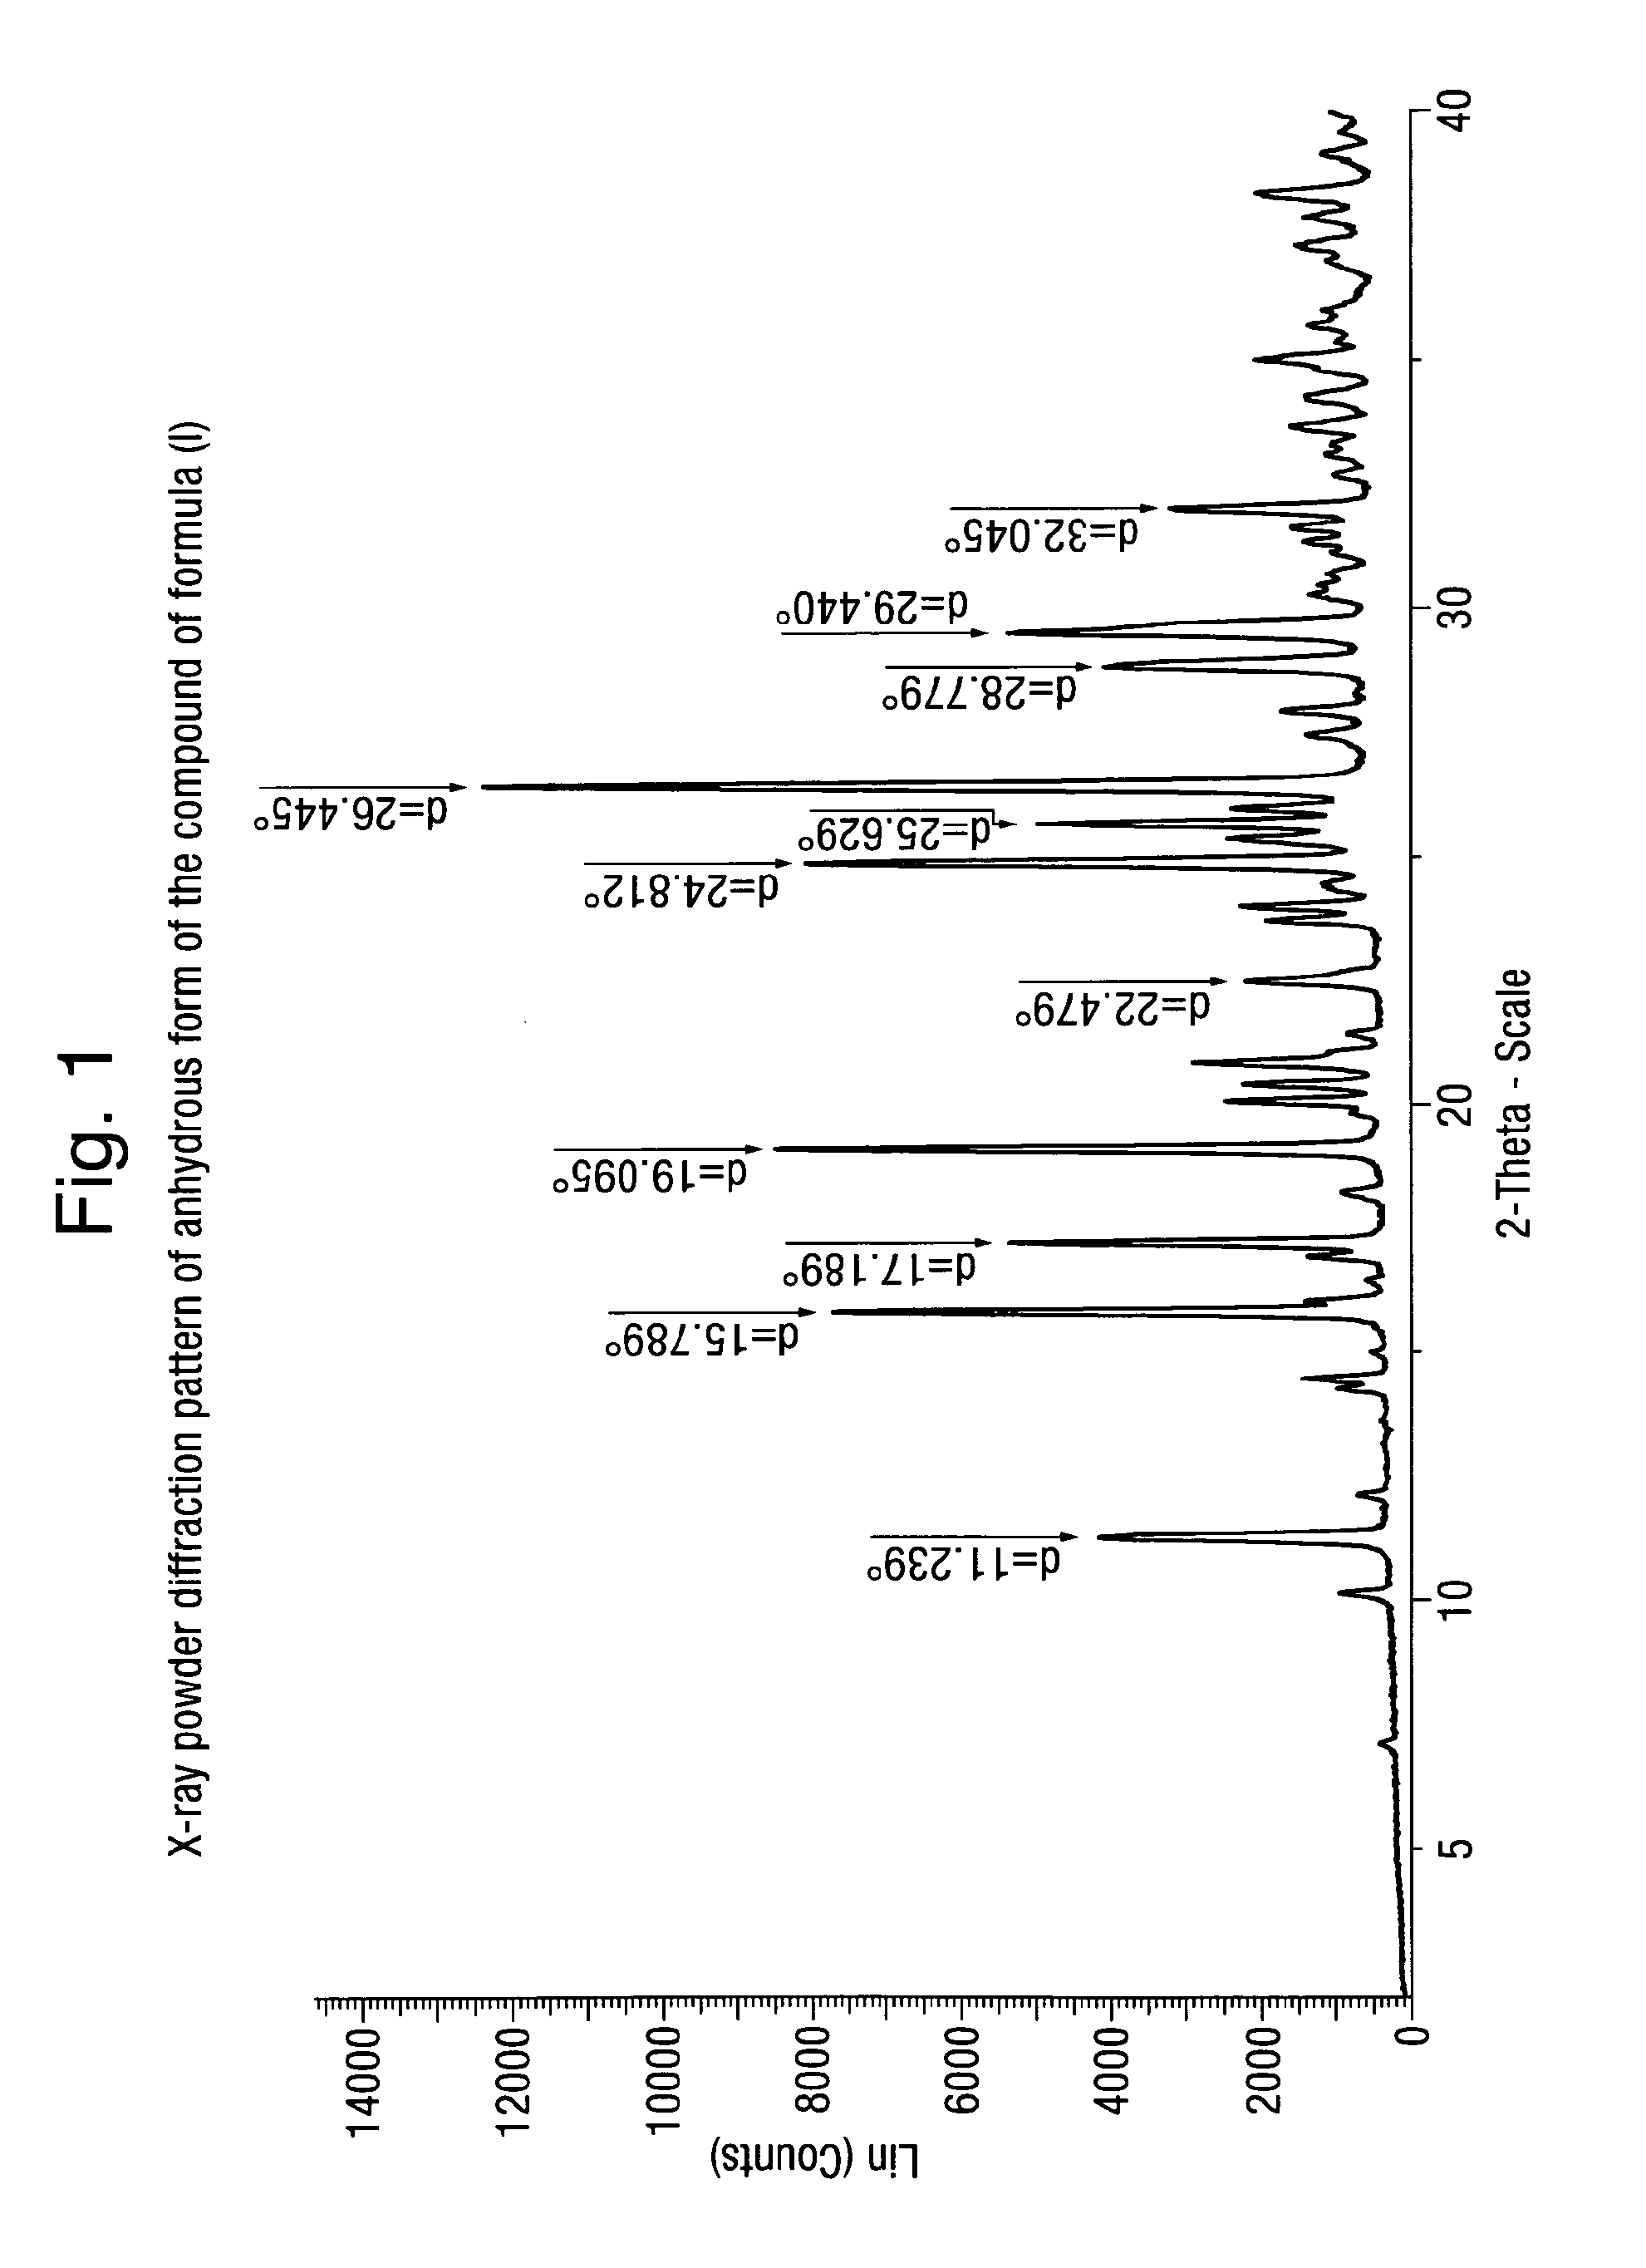 Pharmaceutical compositions, dosage forms and new forms of the compound of formula (I), and methods of use thereof